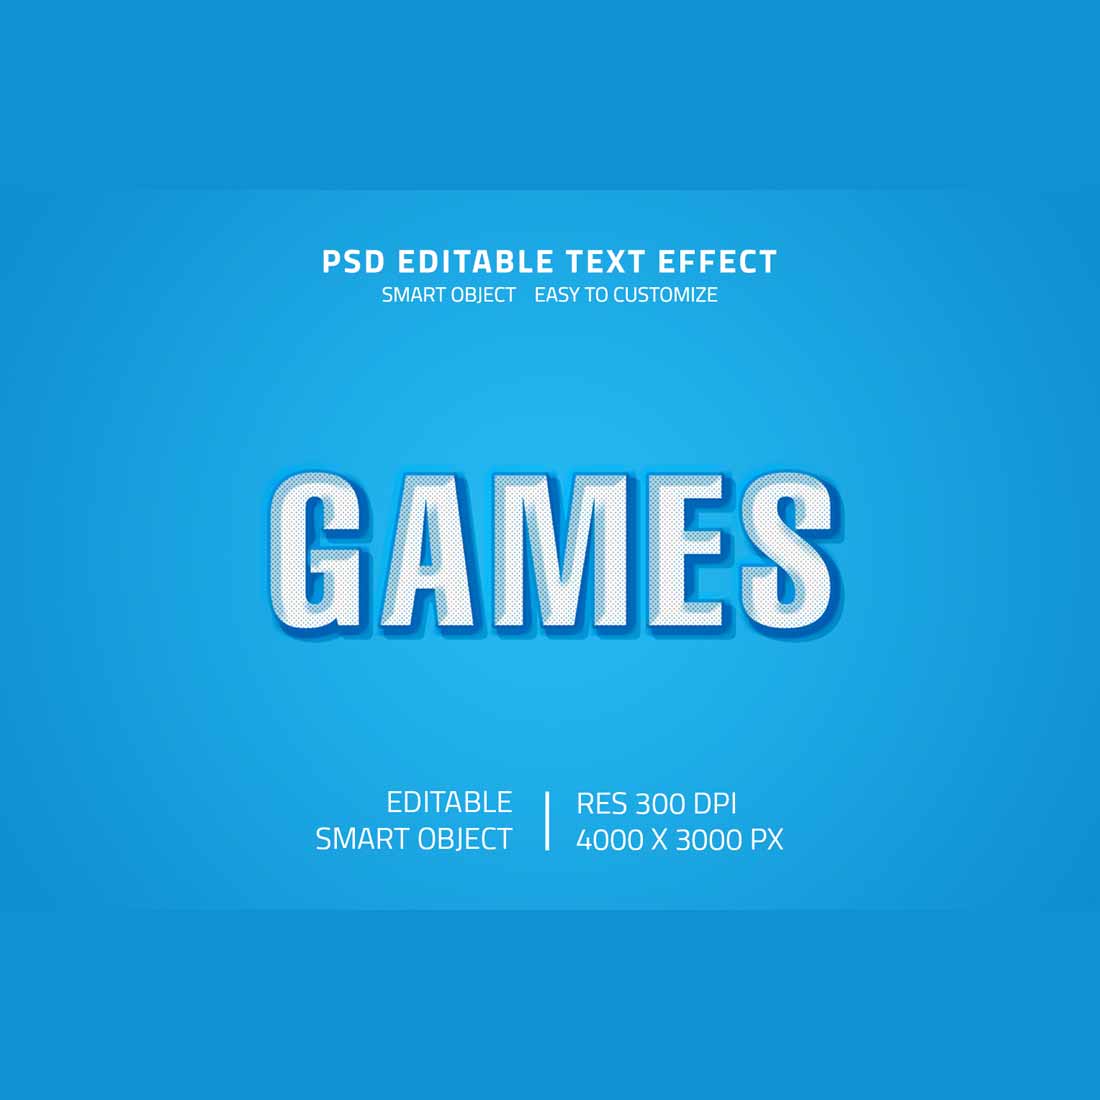 Editable Psd Text Effect preview image.